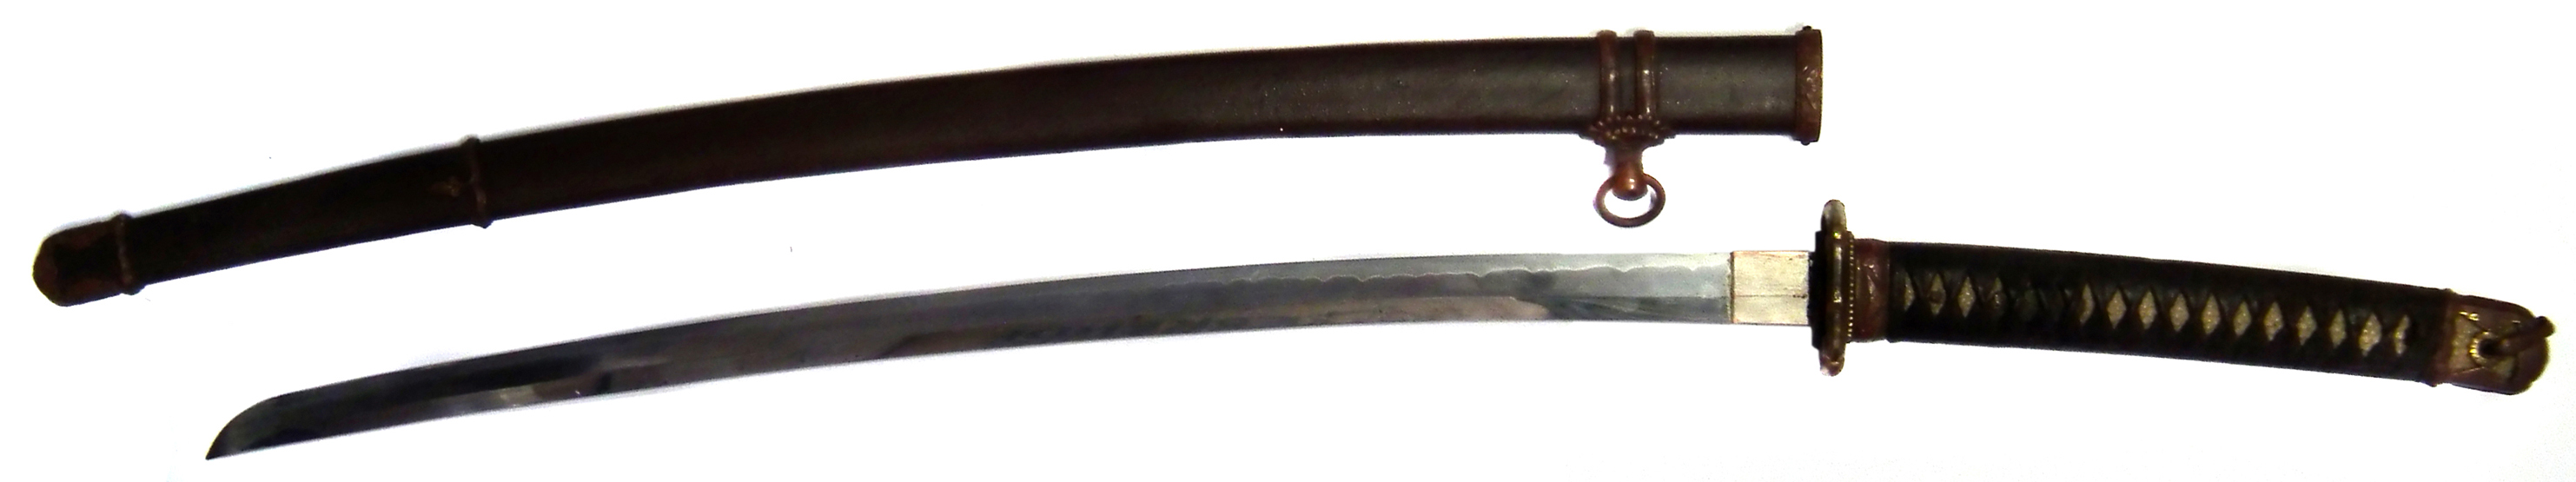 Japanese WW2 period Katana with scabbard lock and cast metal scabbard, overall length 100cm